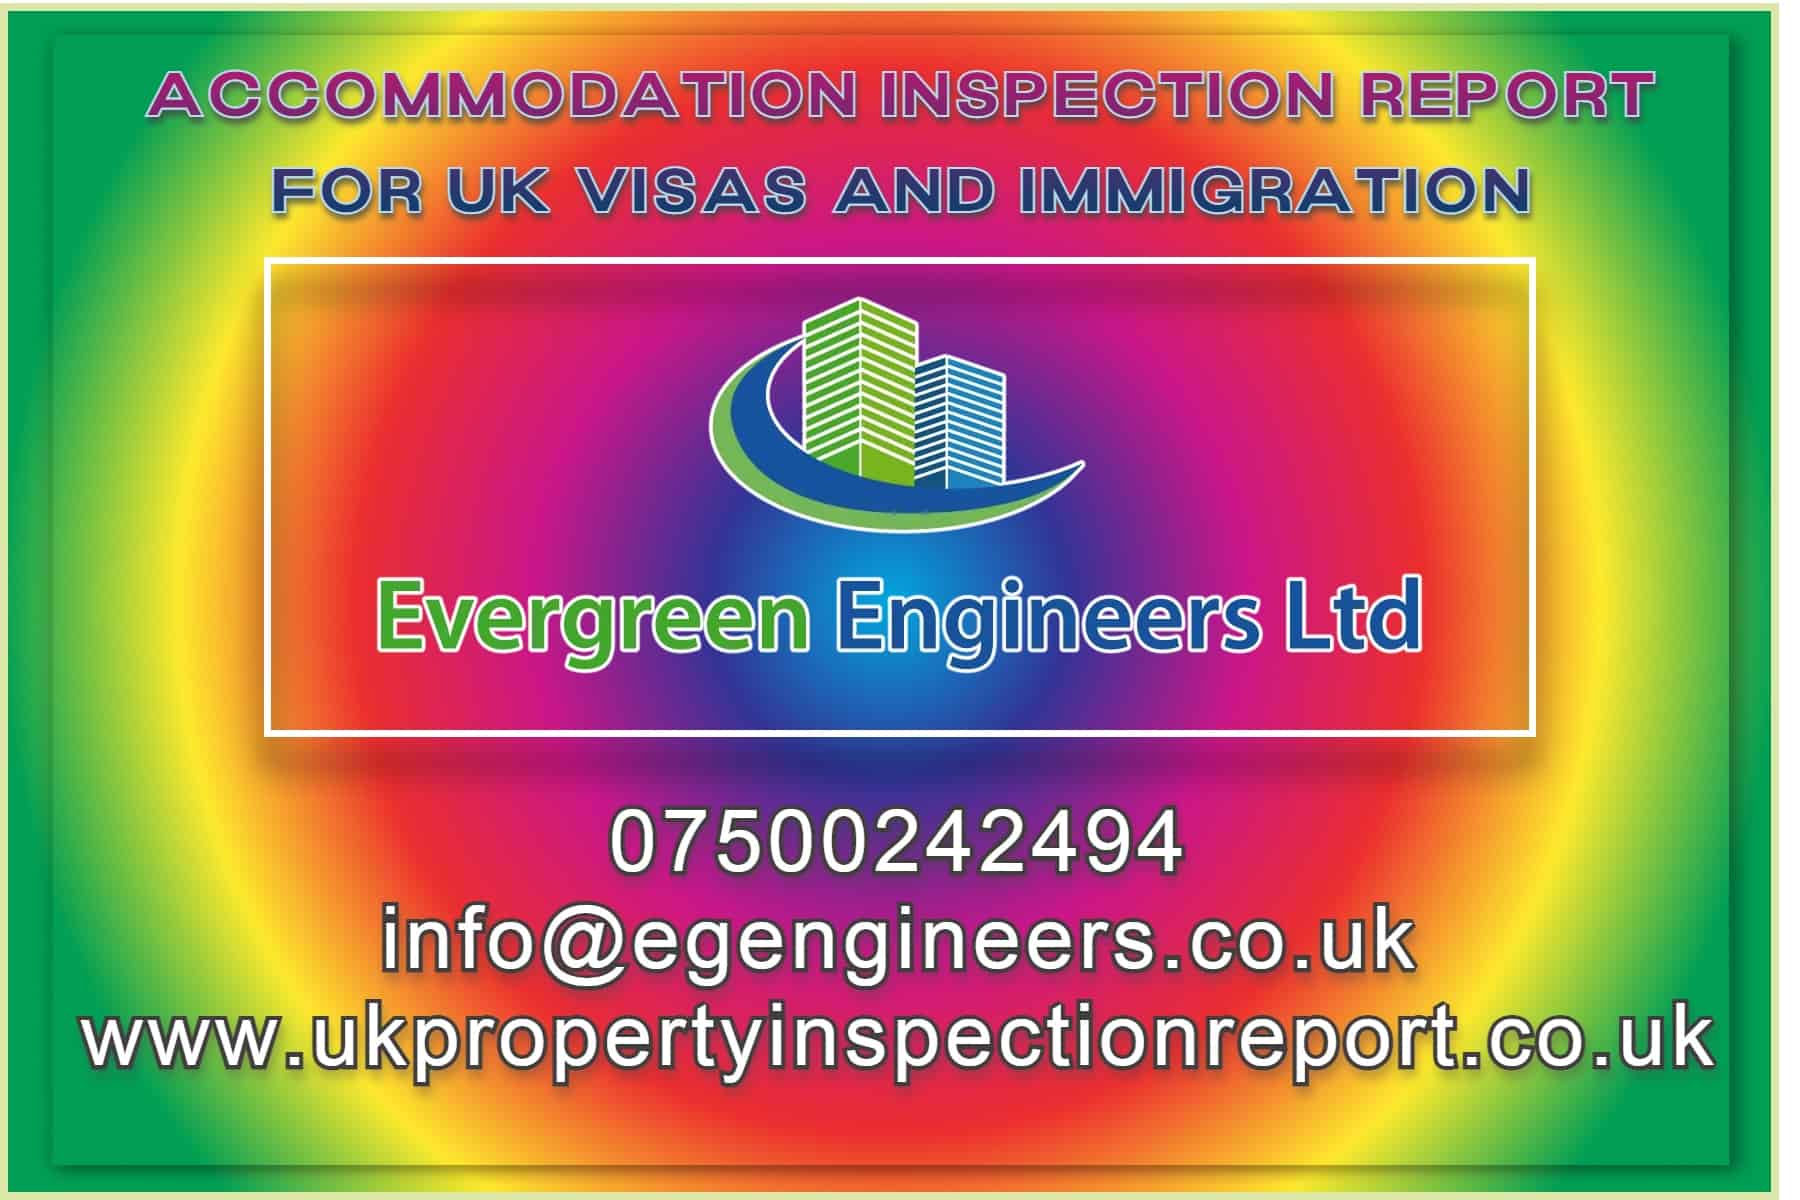 Accommodation Inspection Report for UK Visas and Immigration